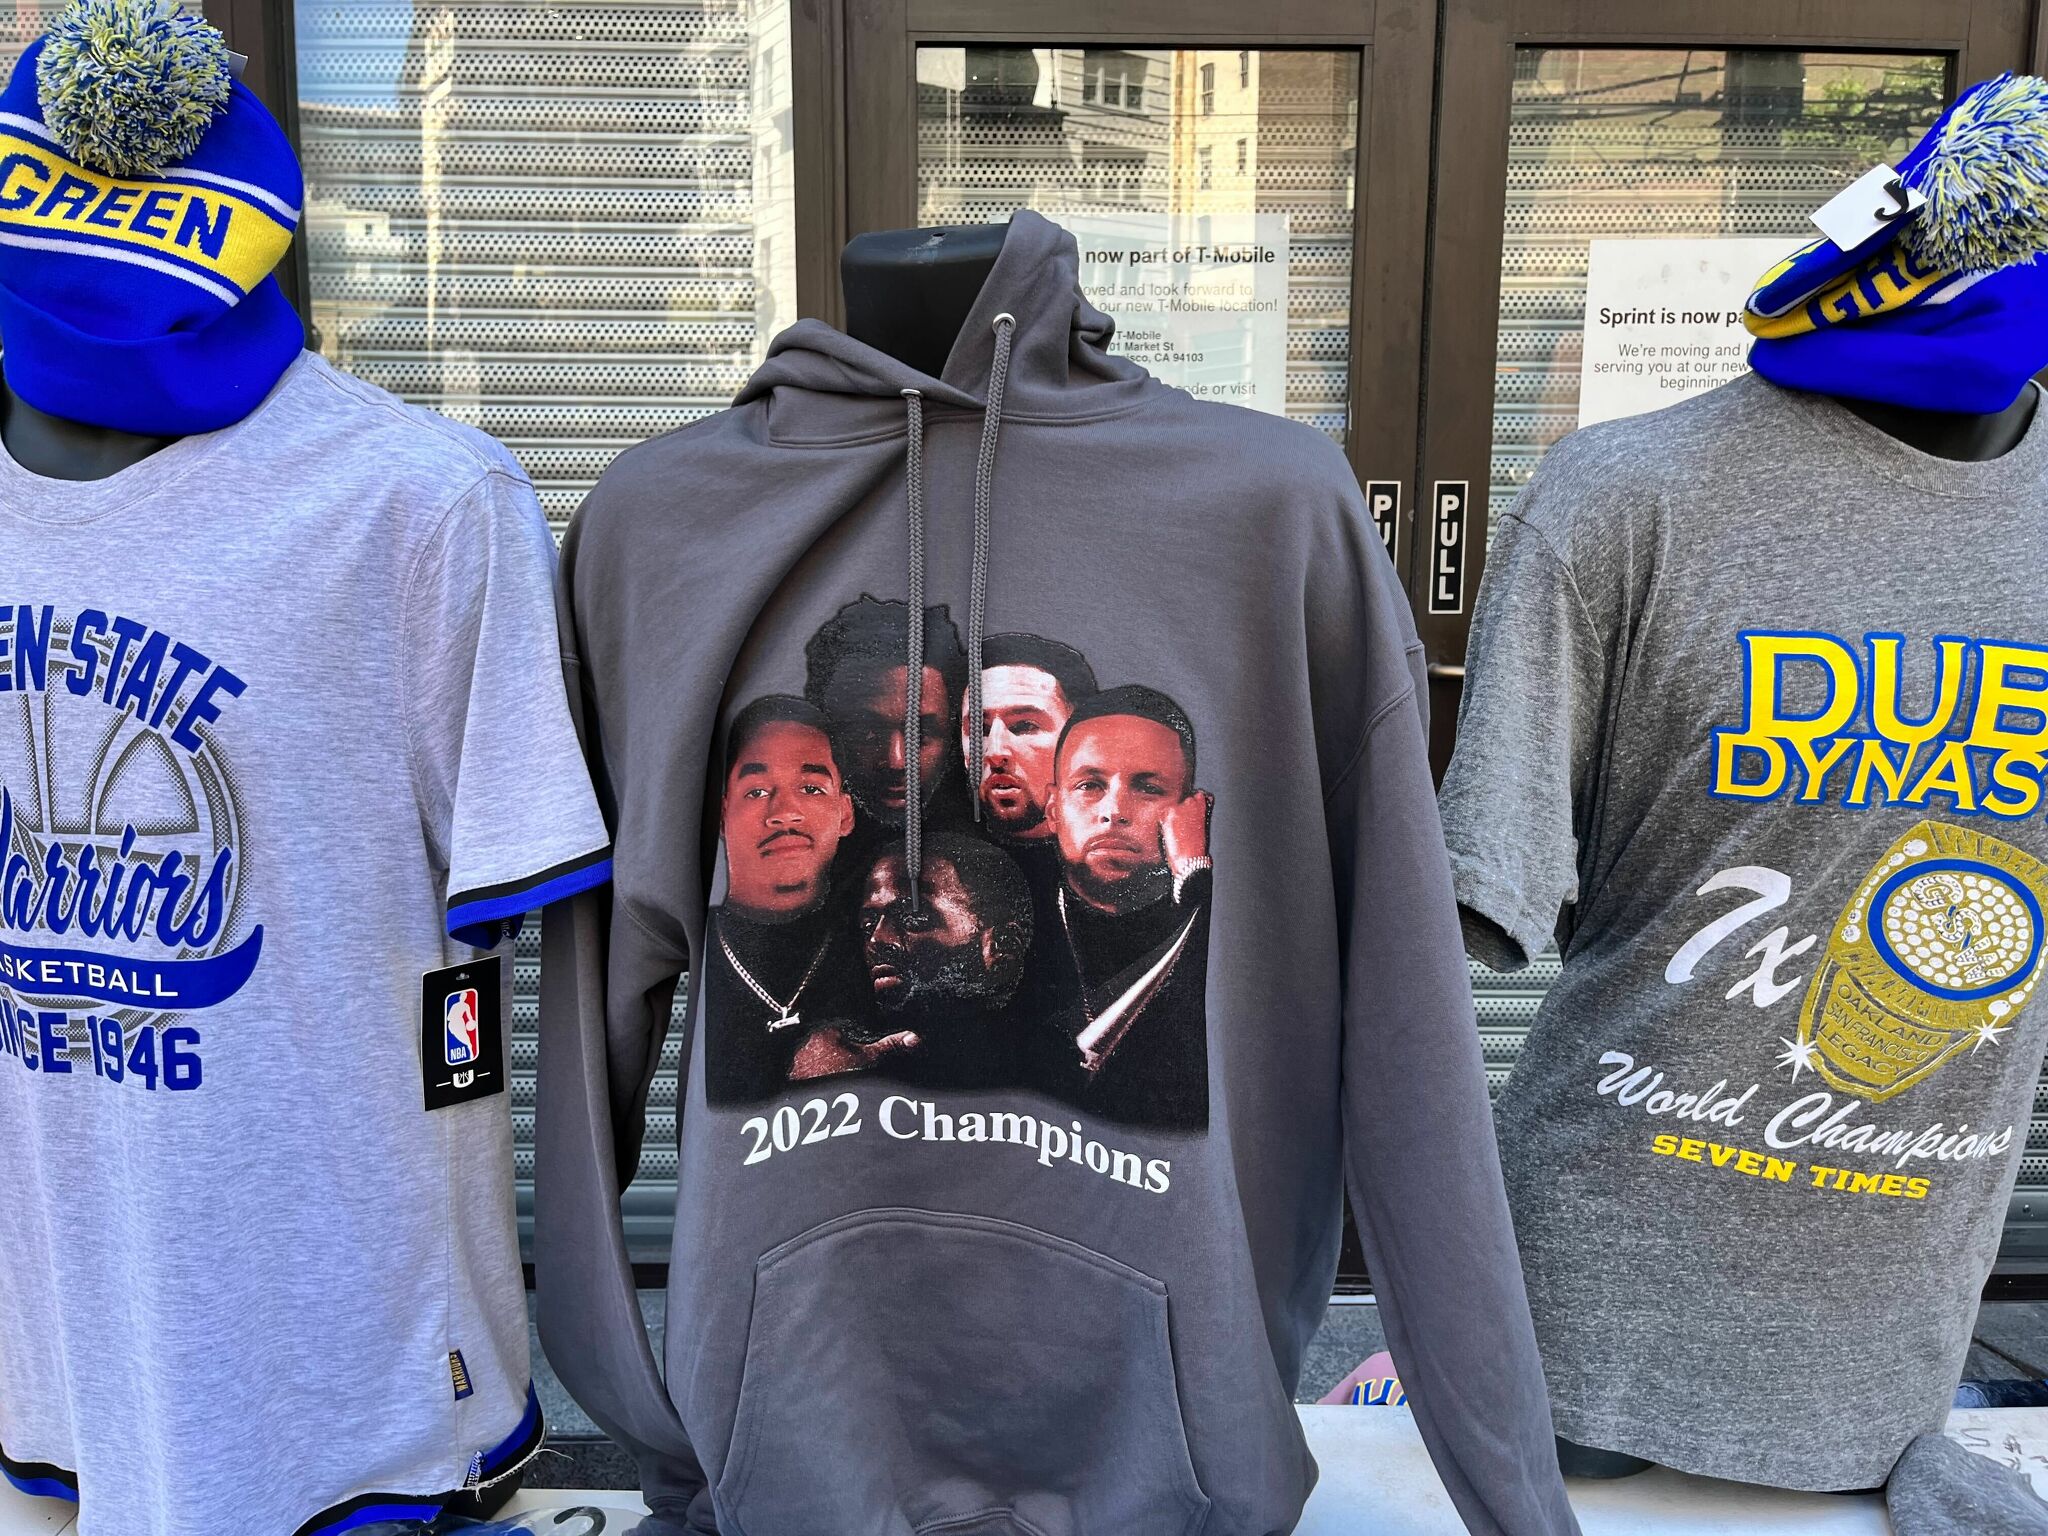 Warriors Championship gear, get yours now